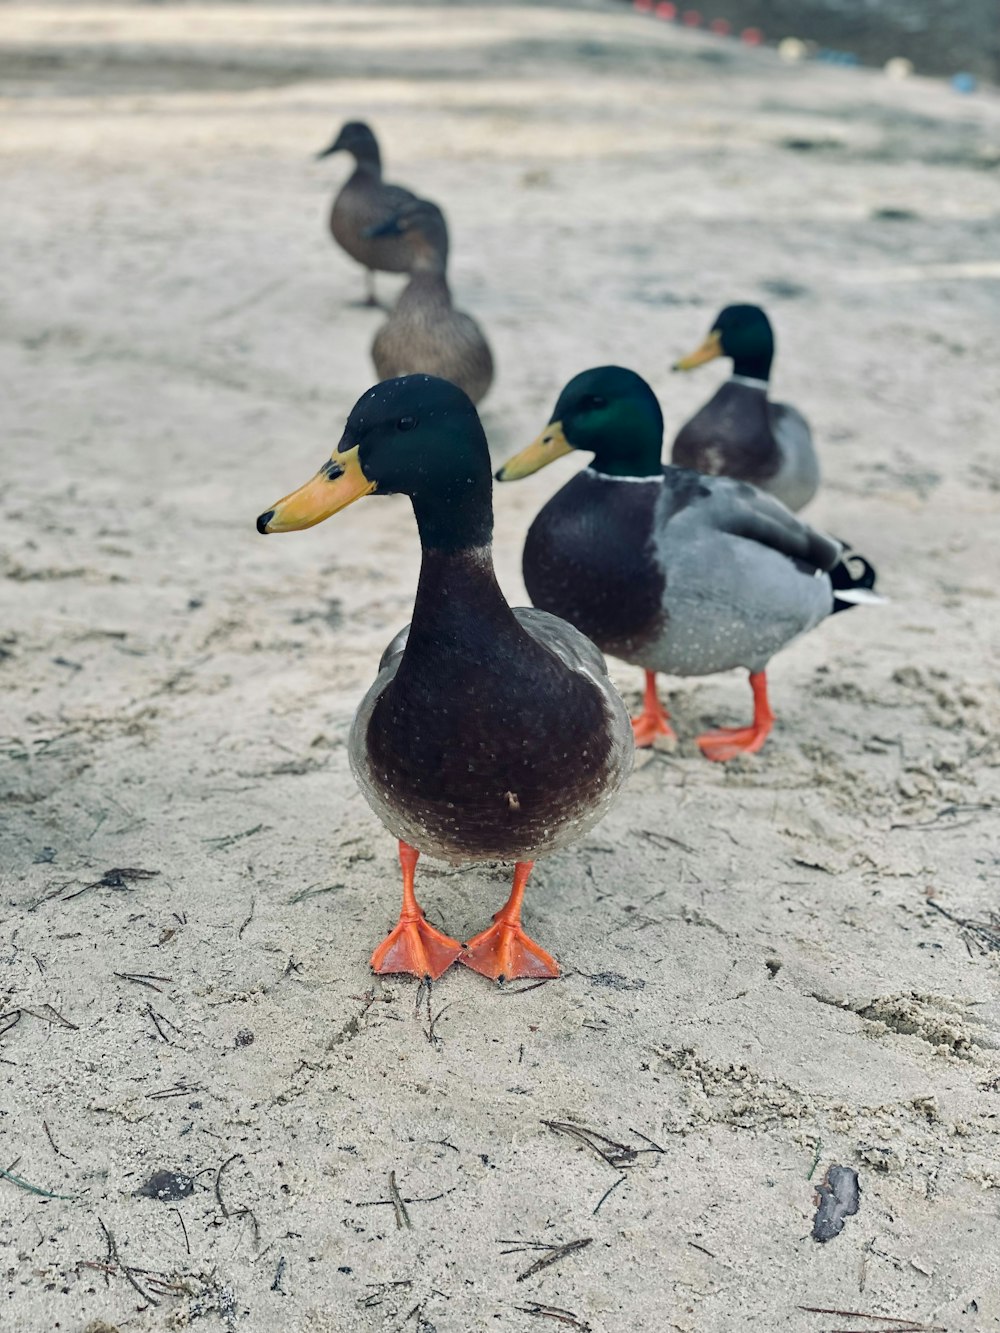 a group of ducks standing on top of a sandy beach